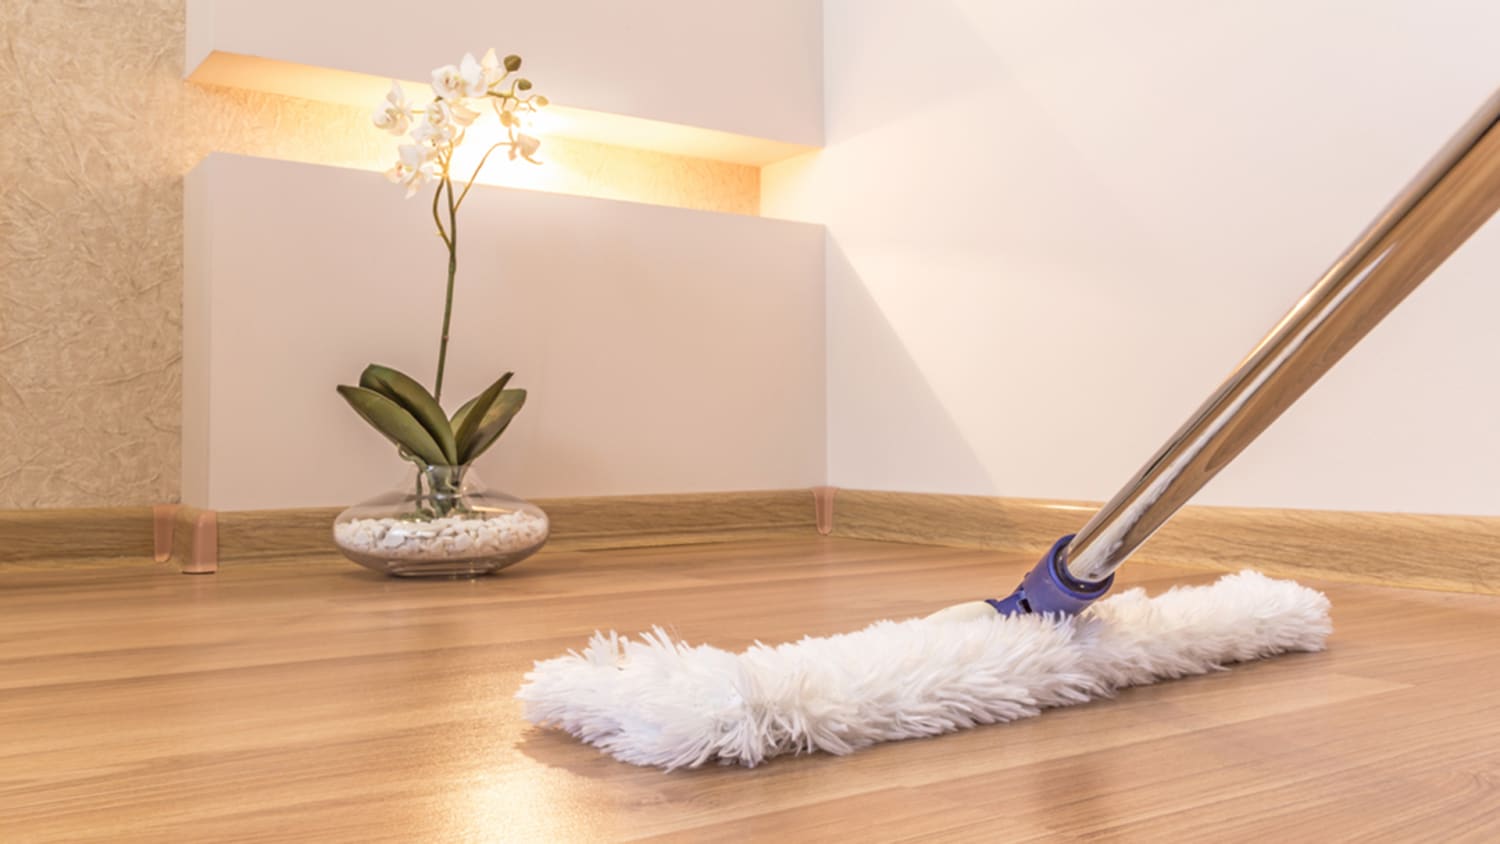 How To Clean Hardwood Floors The Right Way, How To Buff Hardwood Floors At Home